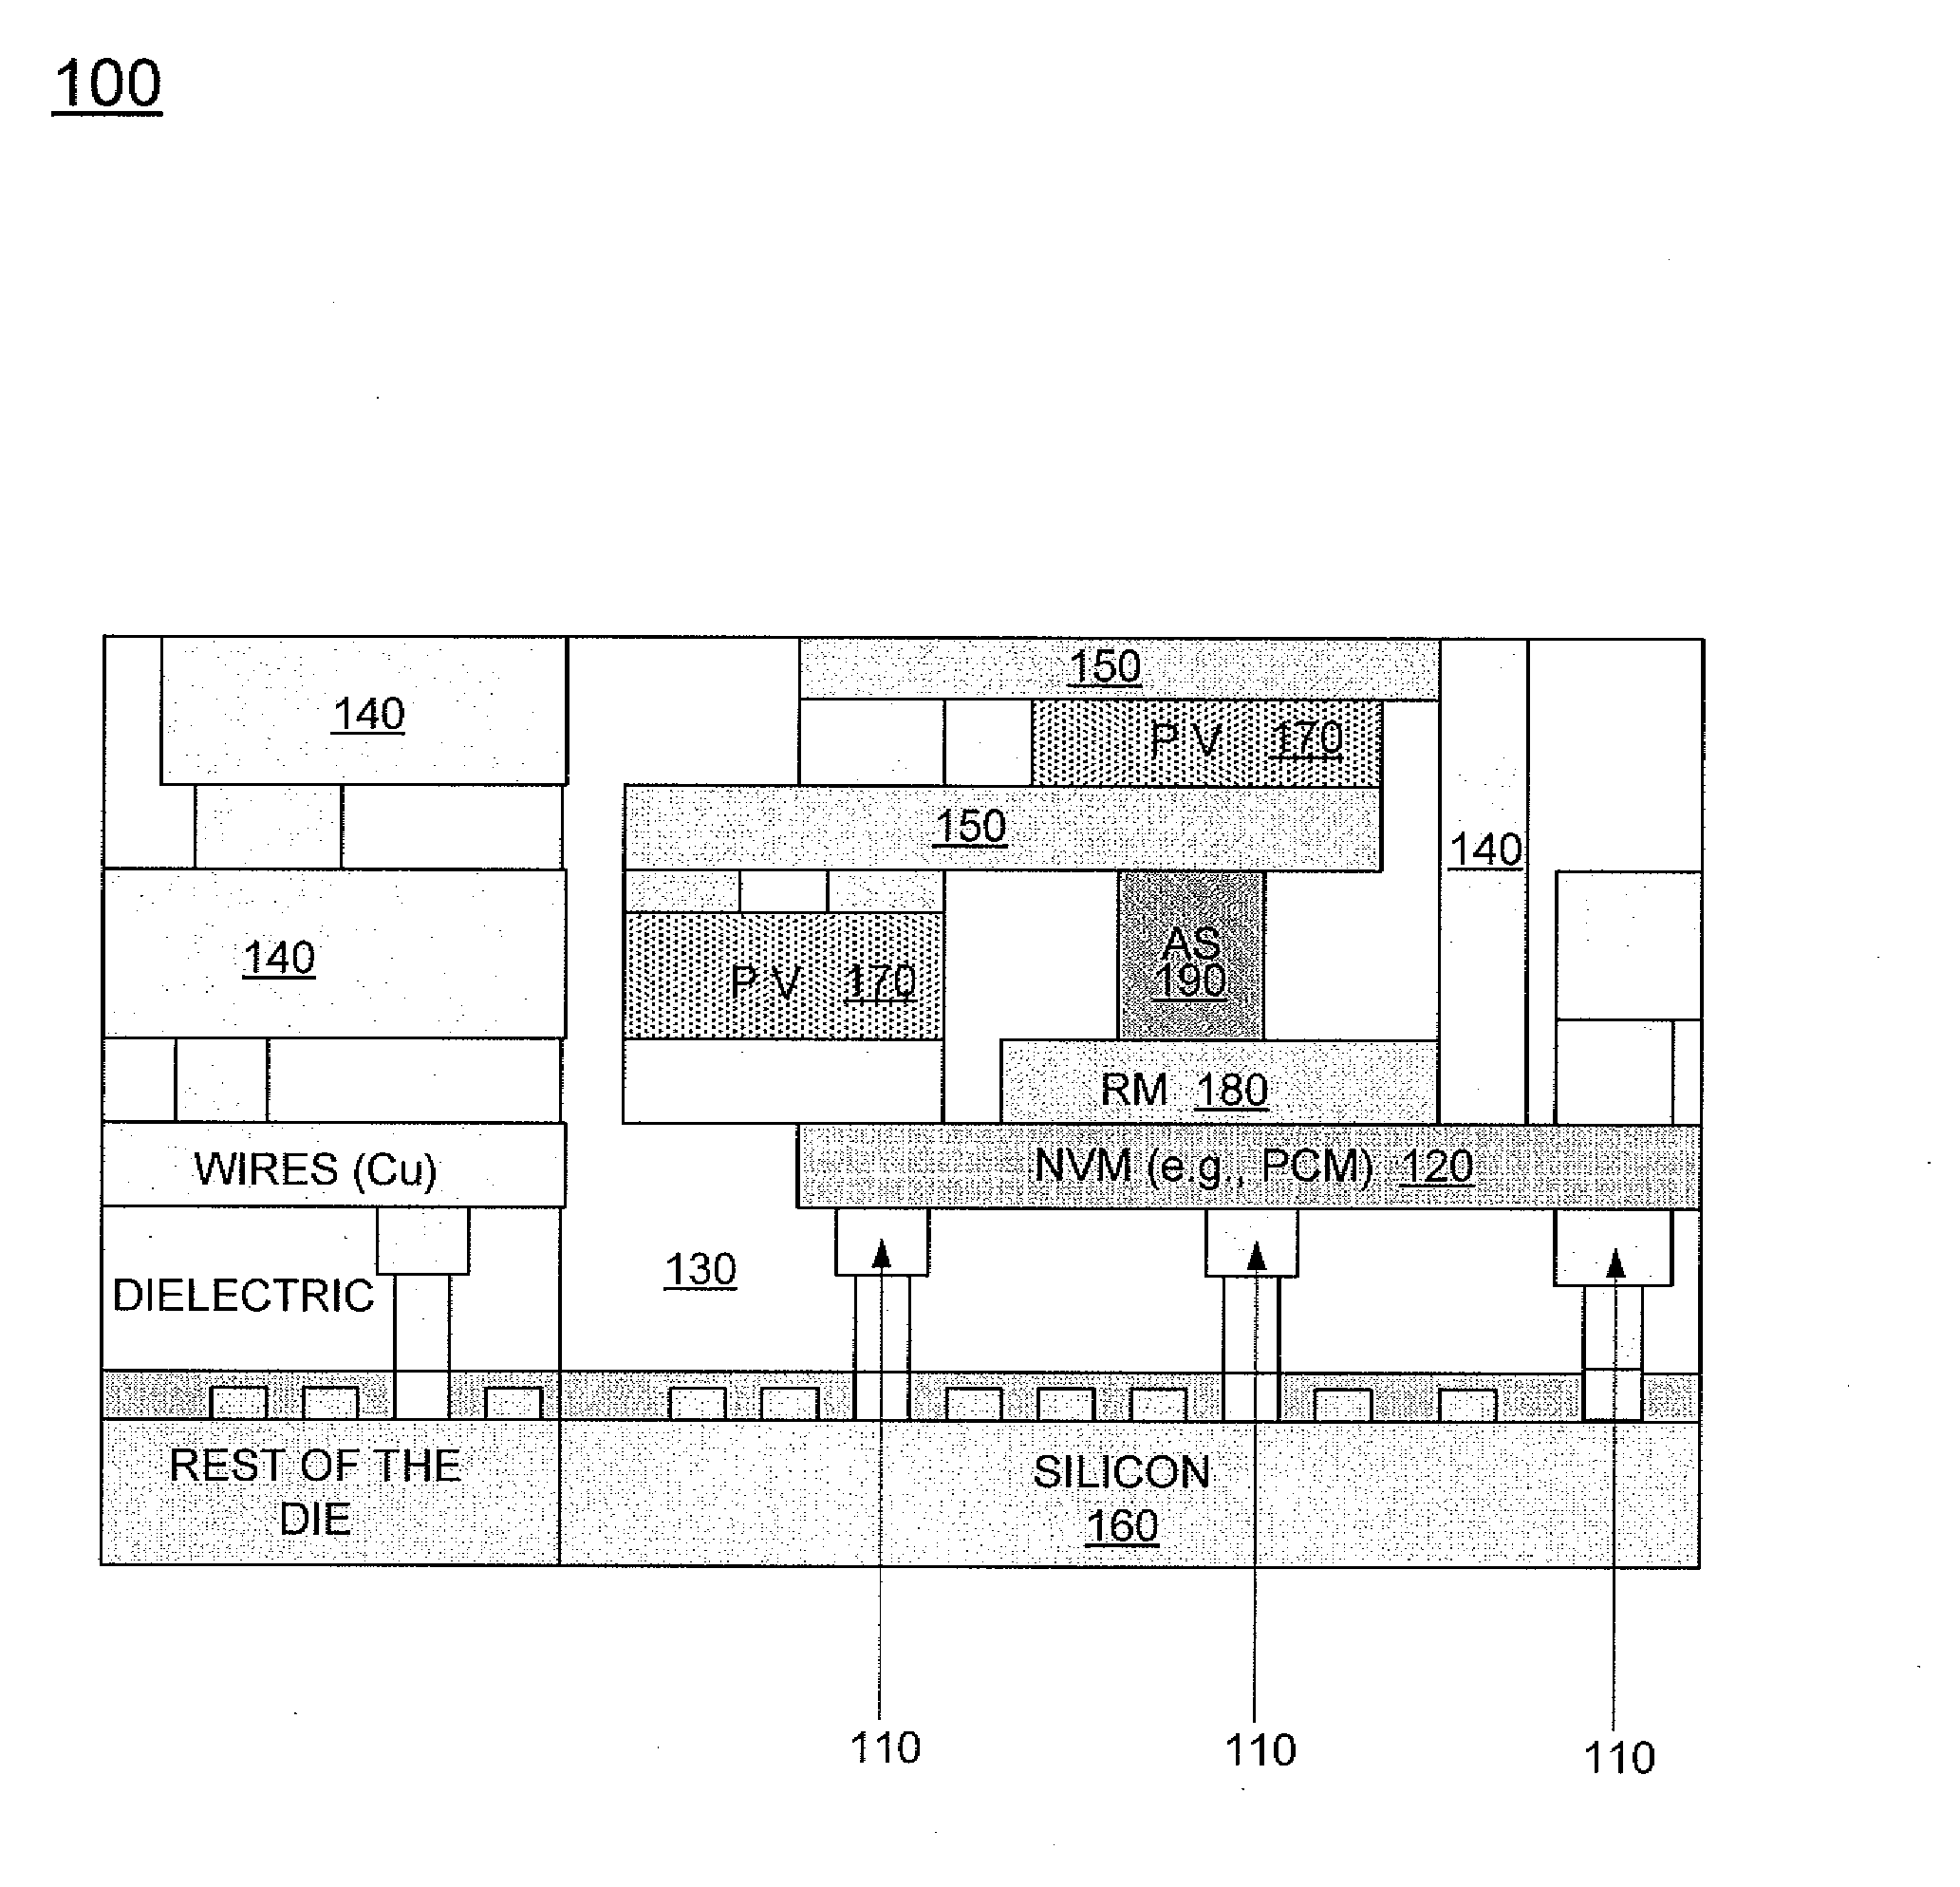 Reactive material for integrated circuit tamper detection and response